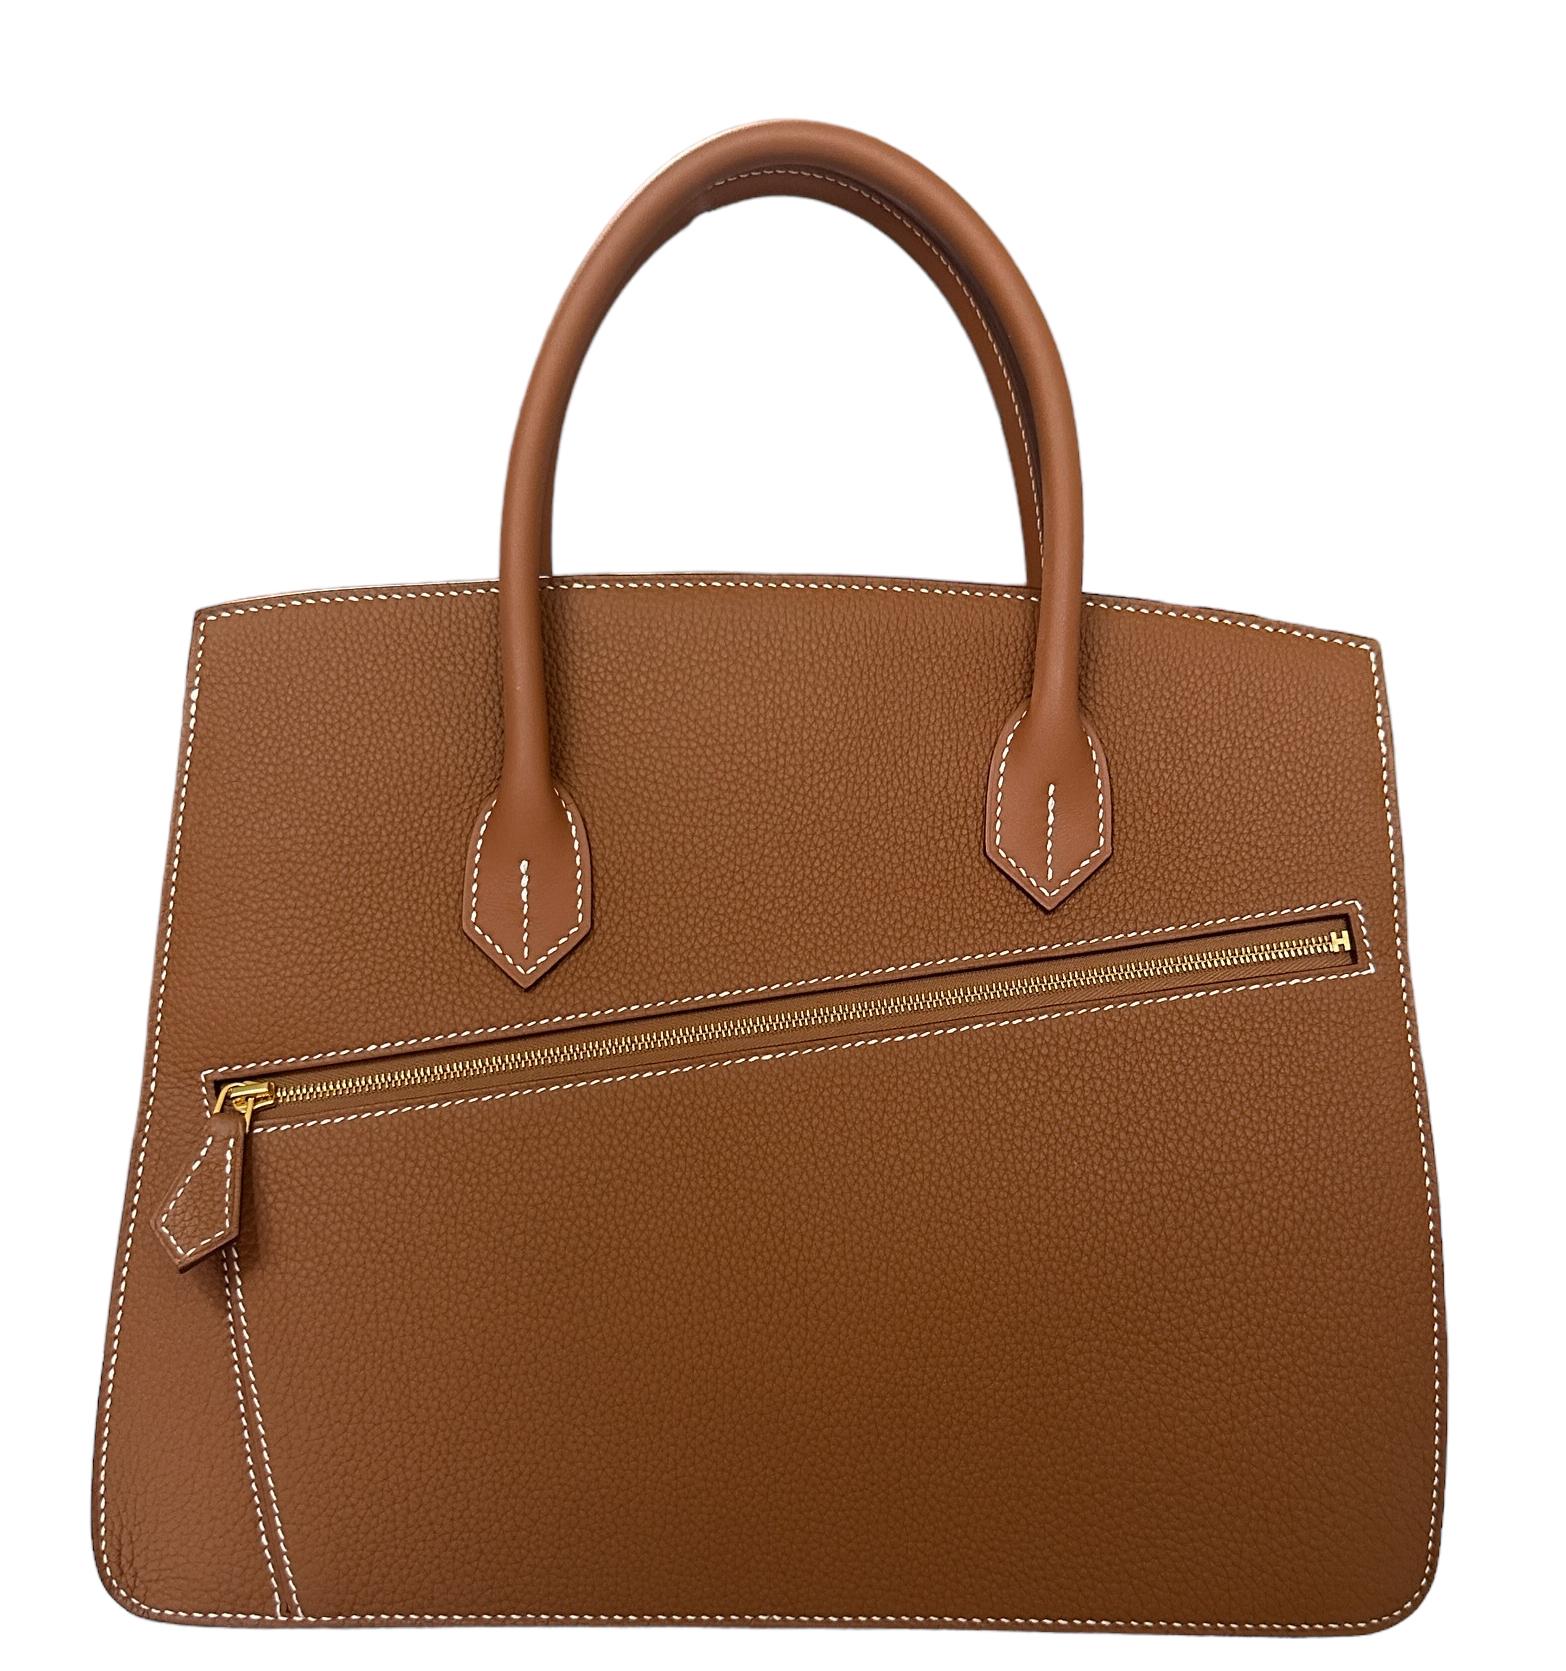 Introducing the Very Limited Desordre Sellier Birkin Bag
This limited edition  Desordre Birkin Sellier is in gold Togo and Swift leather with gold hardware and has contrast stitching, distorted flaps with turnlock closures,  exterior flap pocket and